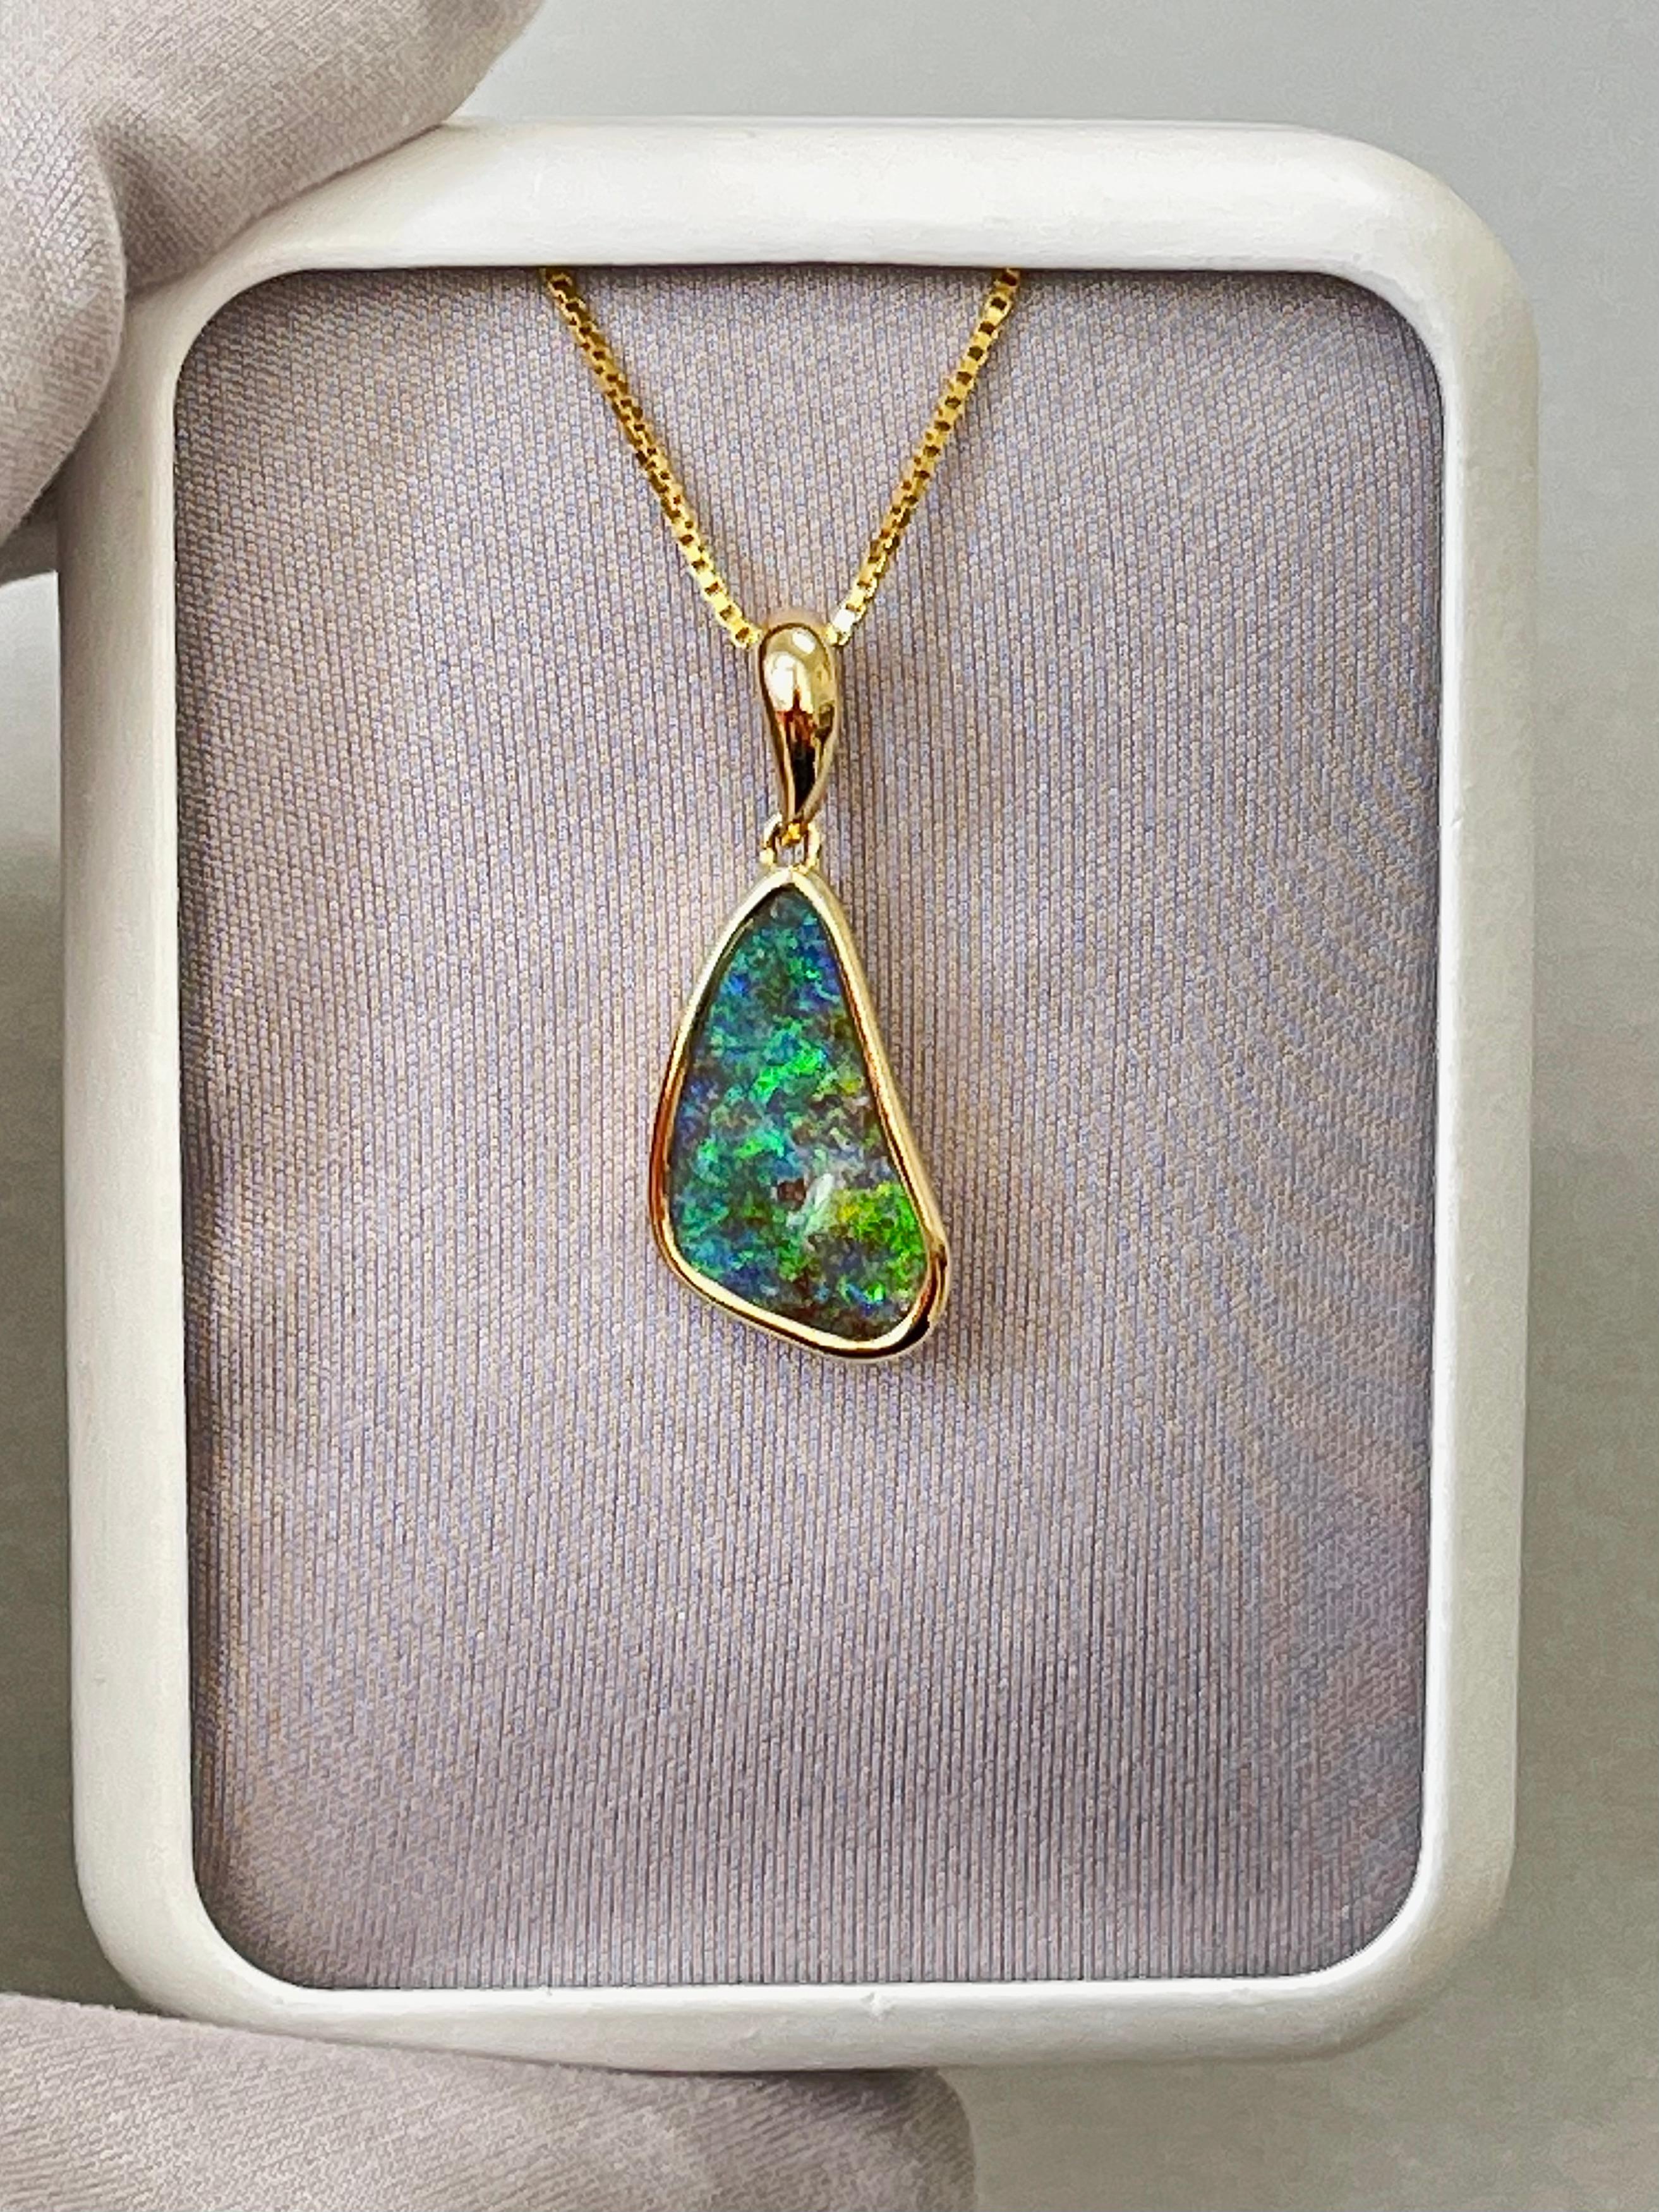 Contemporary Natural Solid Australian 4.46ct Boulder Opal Pendant Necklace in 18k Yellow Gold